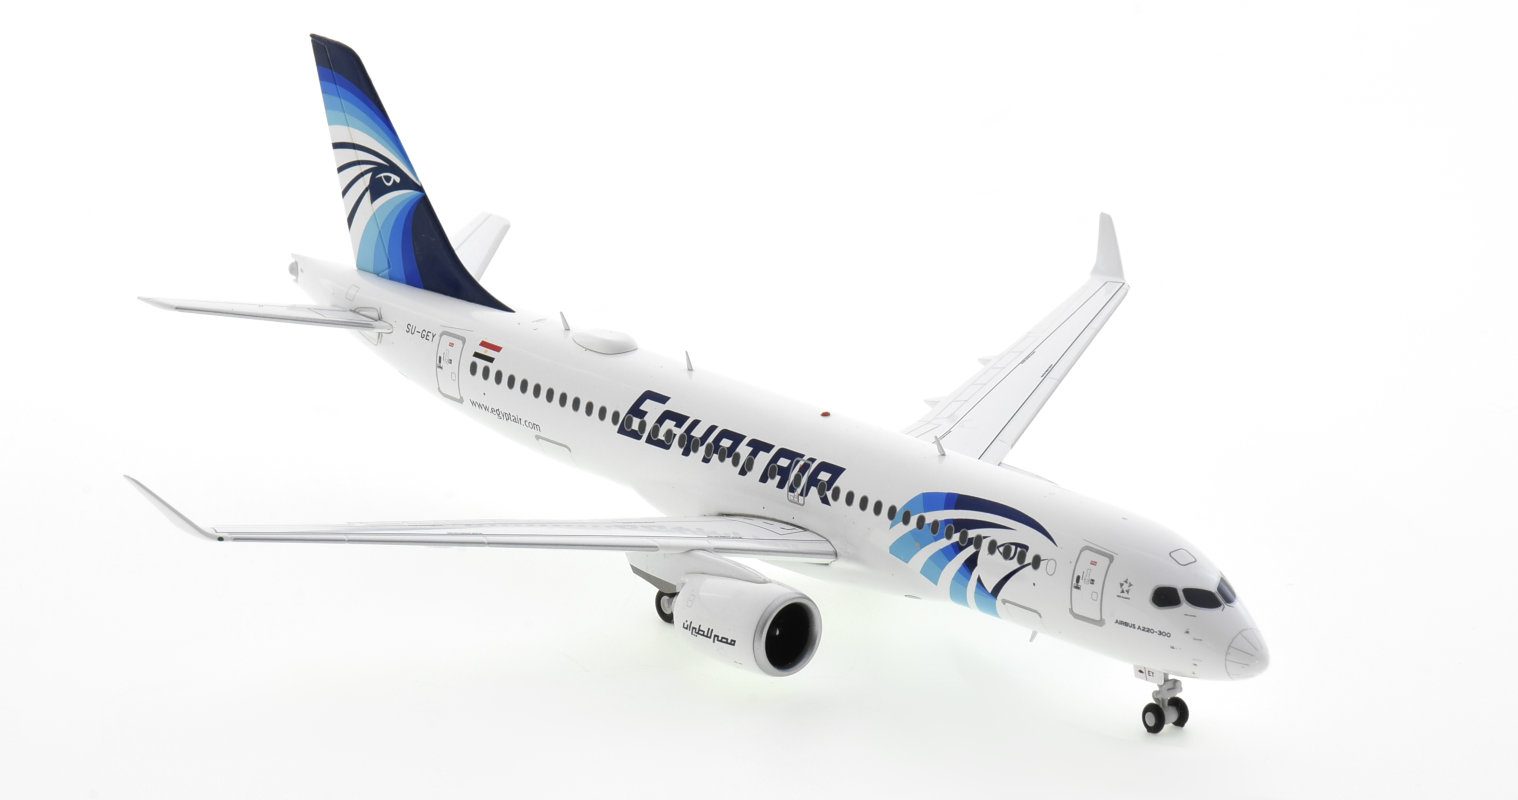 Front starboard view of JC Wings LH2MSR232 -  Airbus A220-300 1/200 scale diecast model, registration SU-GEY in Egyptair's livery.